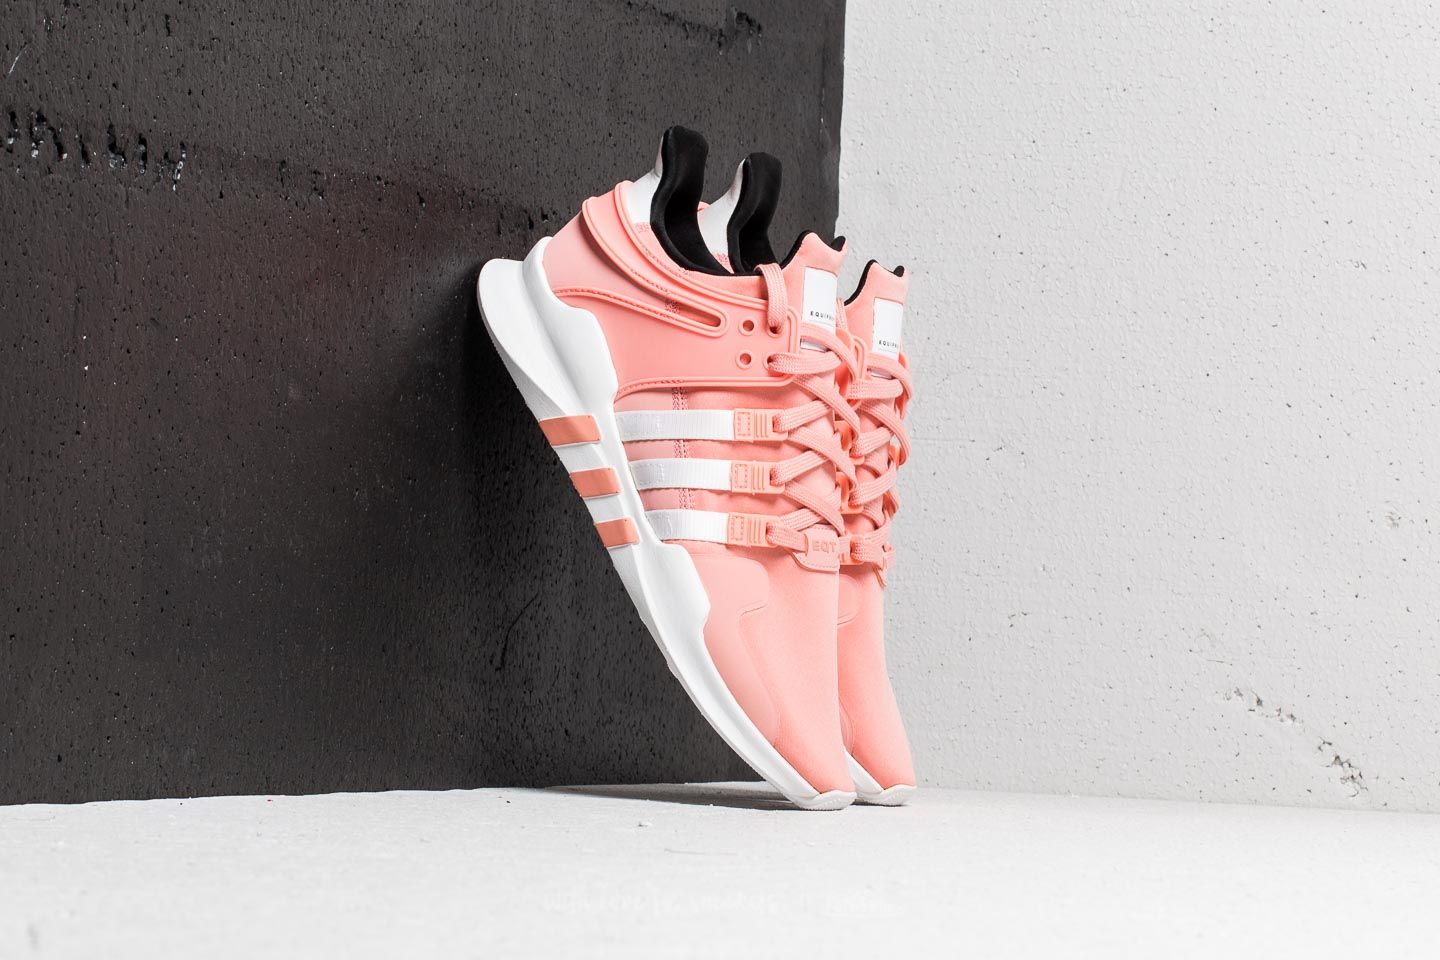 Buty męskie adidas EQT Support ADV Trace Pink/ Ftw White/ Core Black